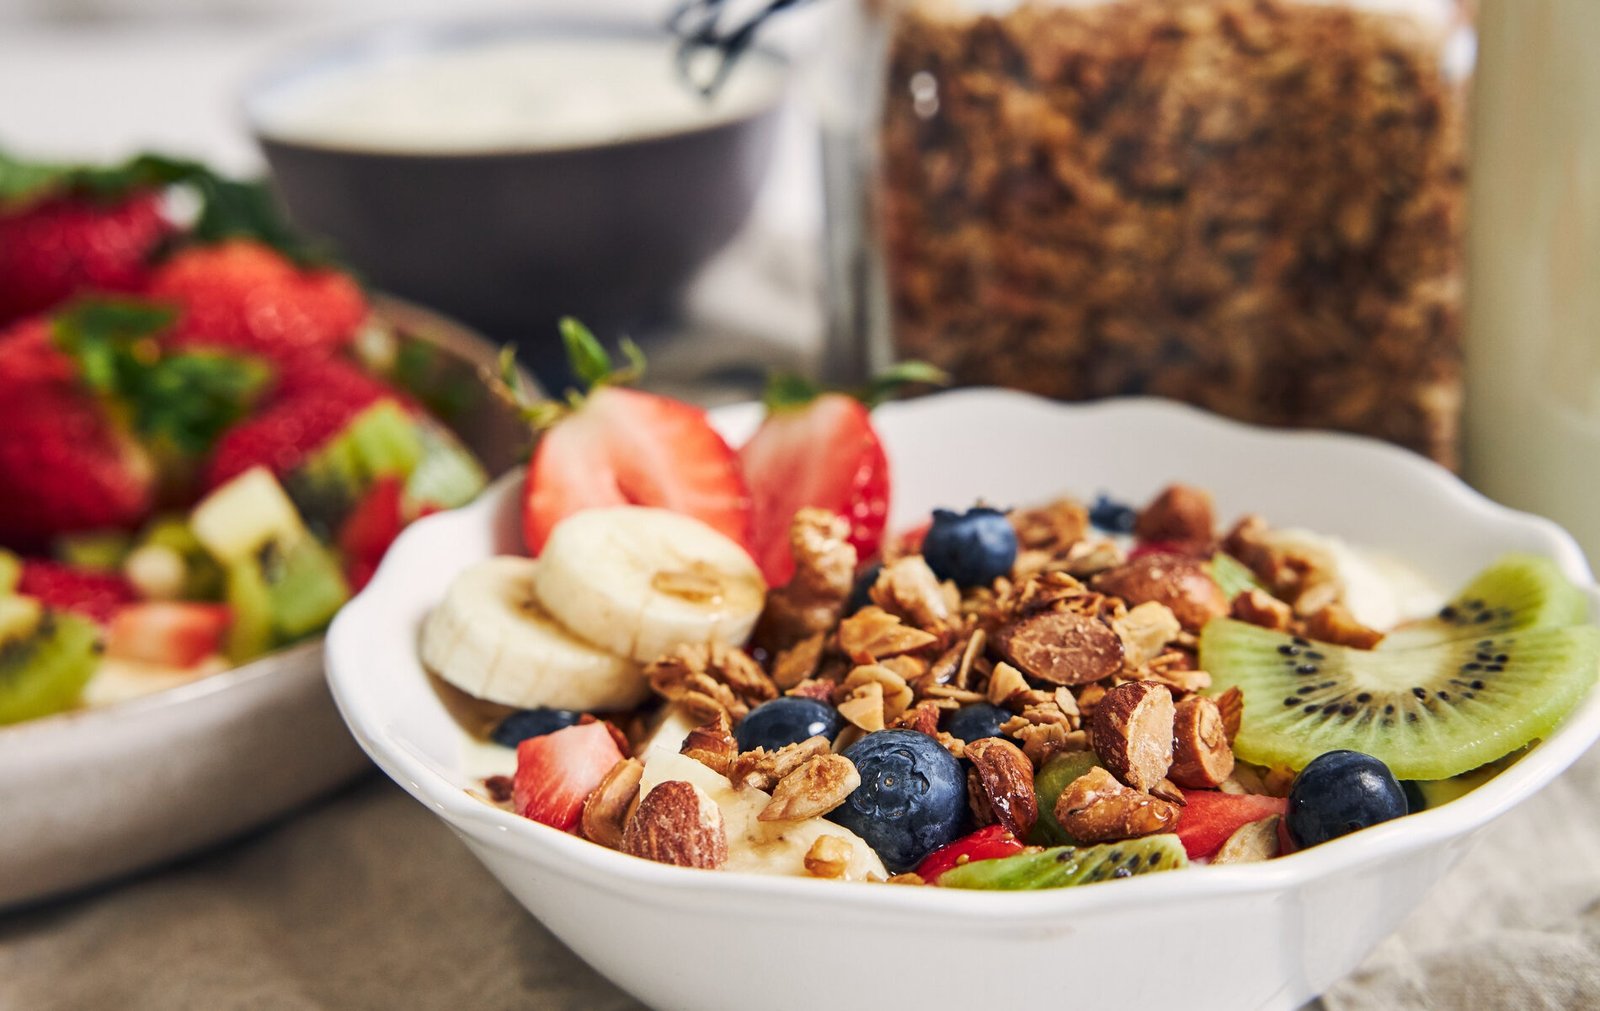 bowls-of-granola-with-yogurt-fruits-and-berries-on-white-surface